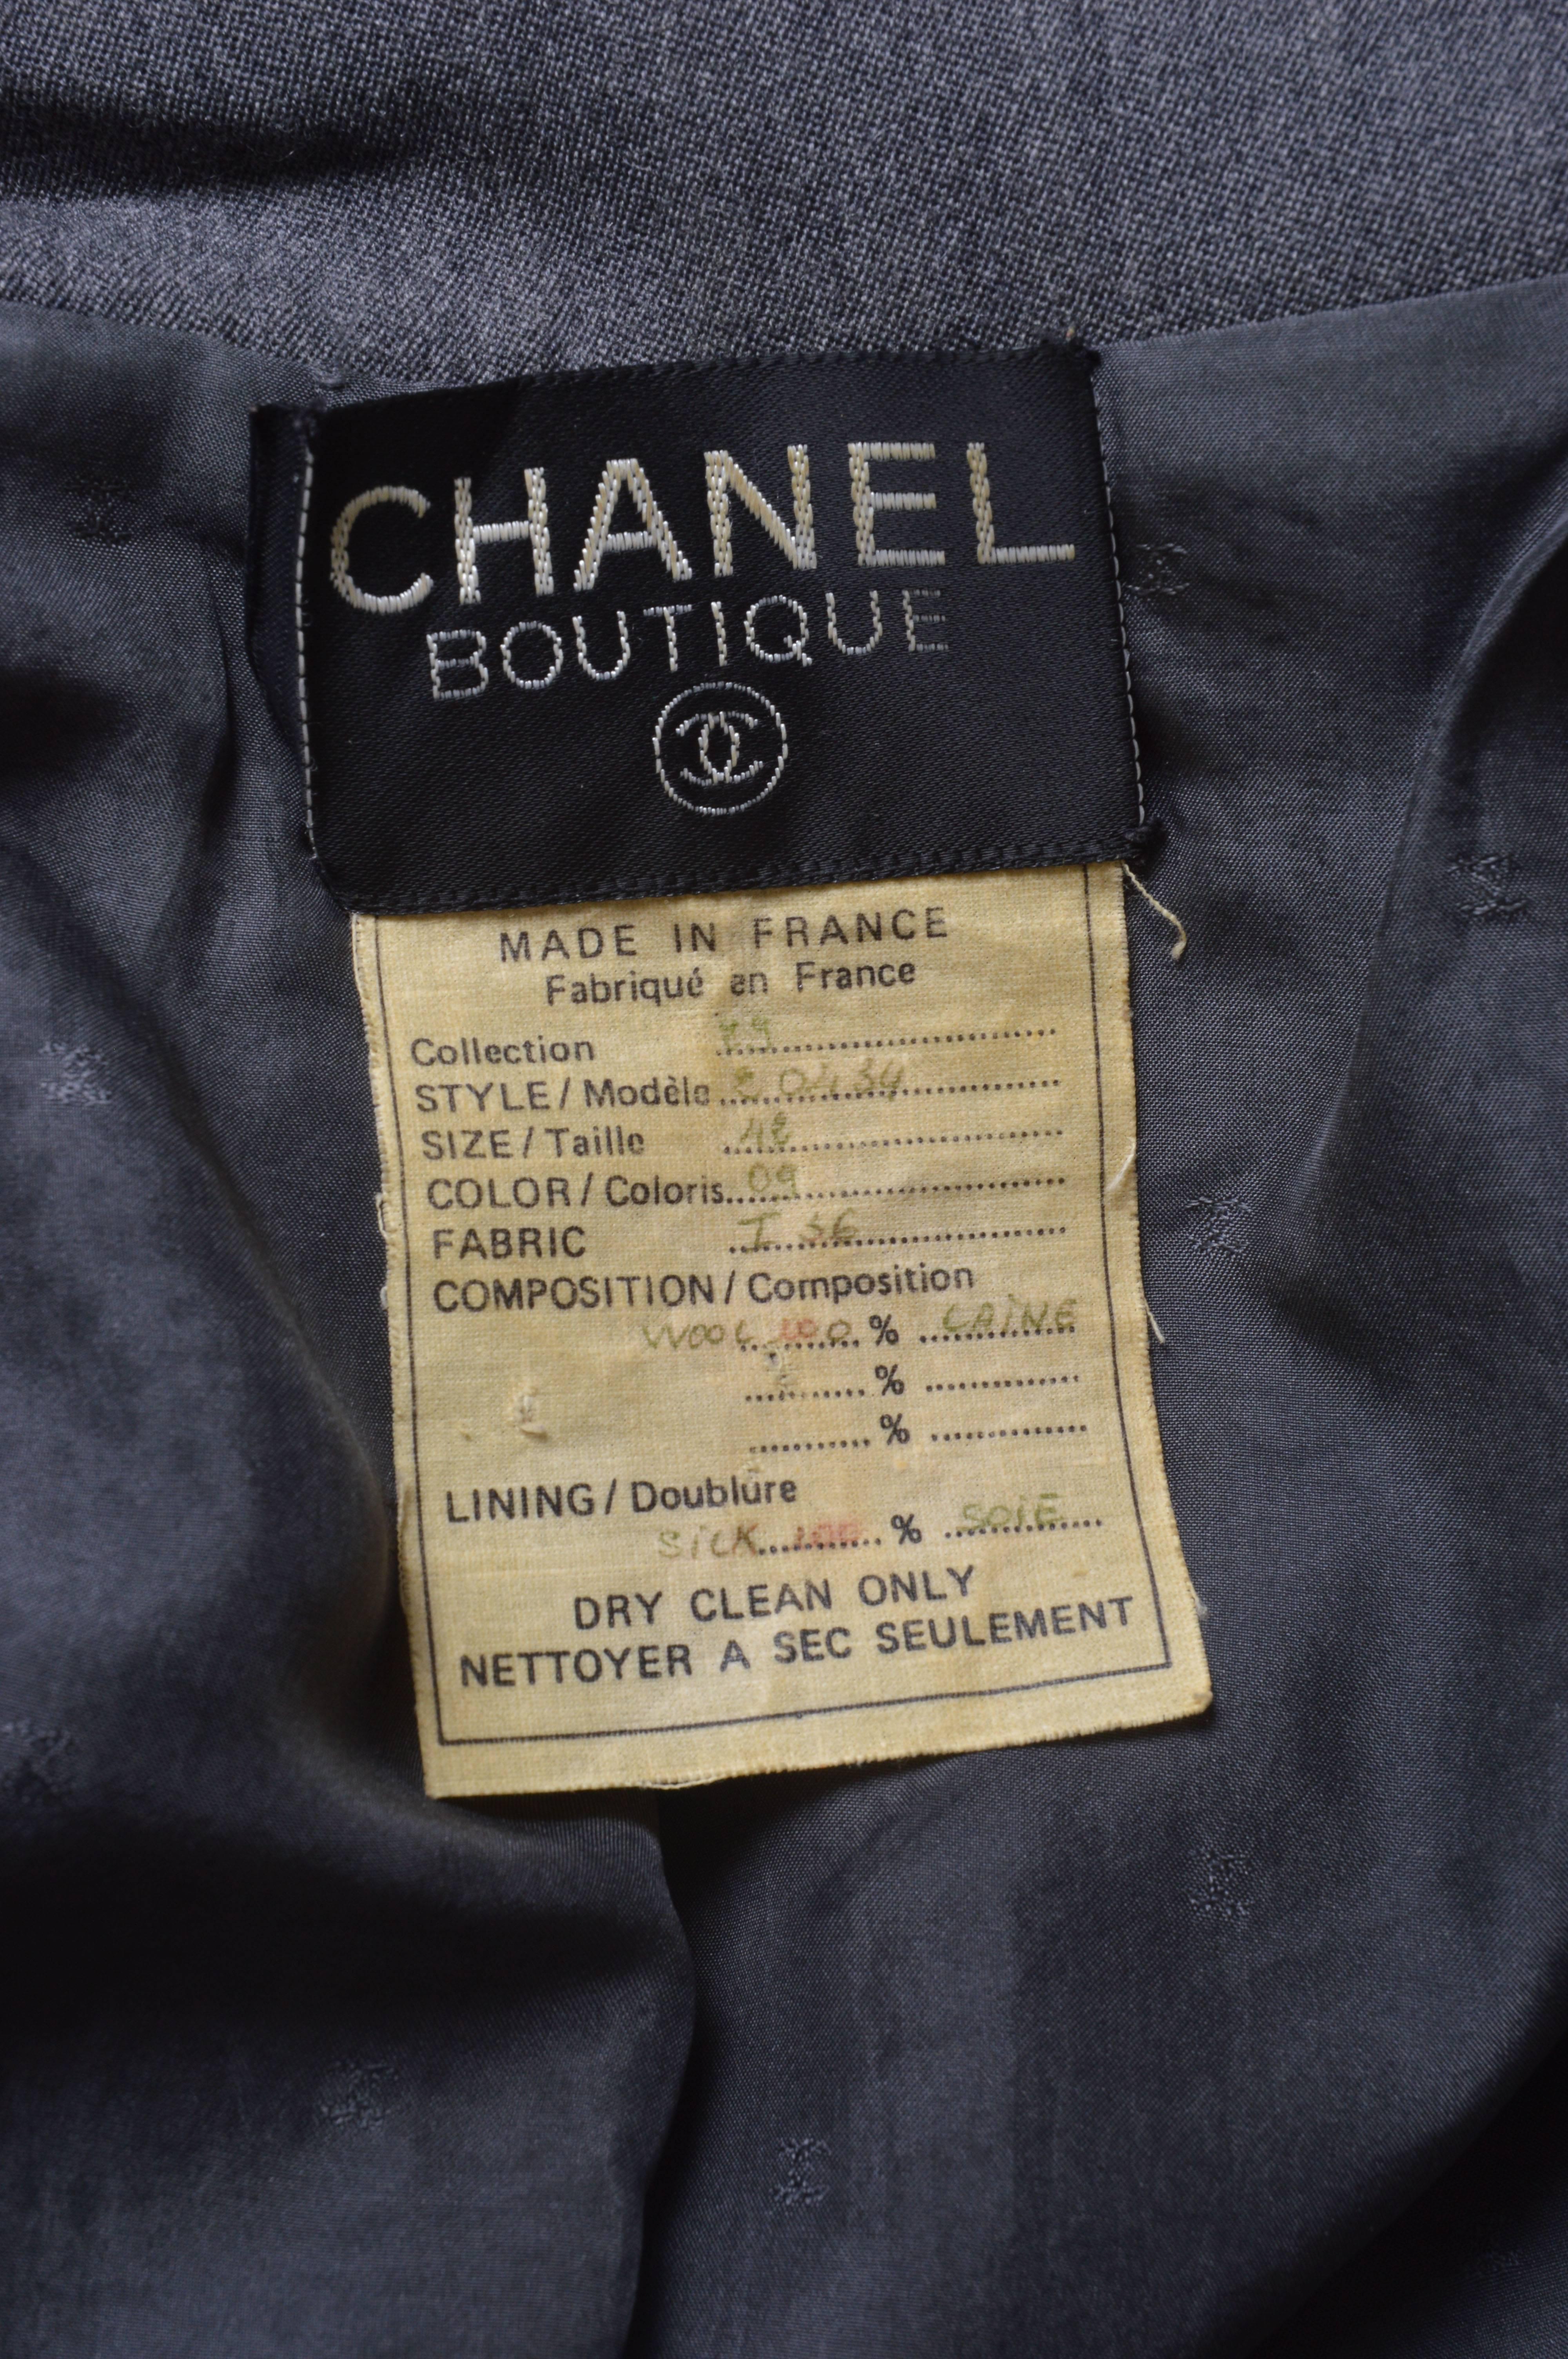 Black Chanel Boutique Gray Military Style Skirt Suit